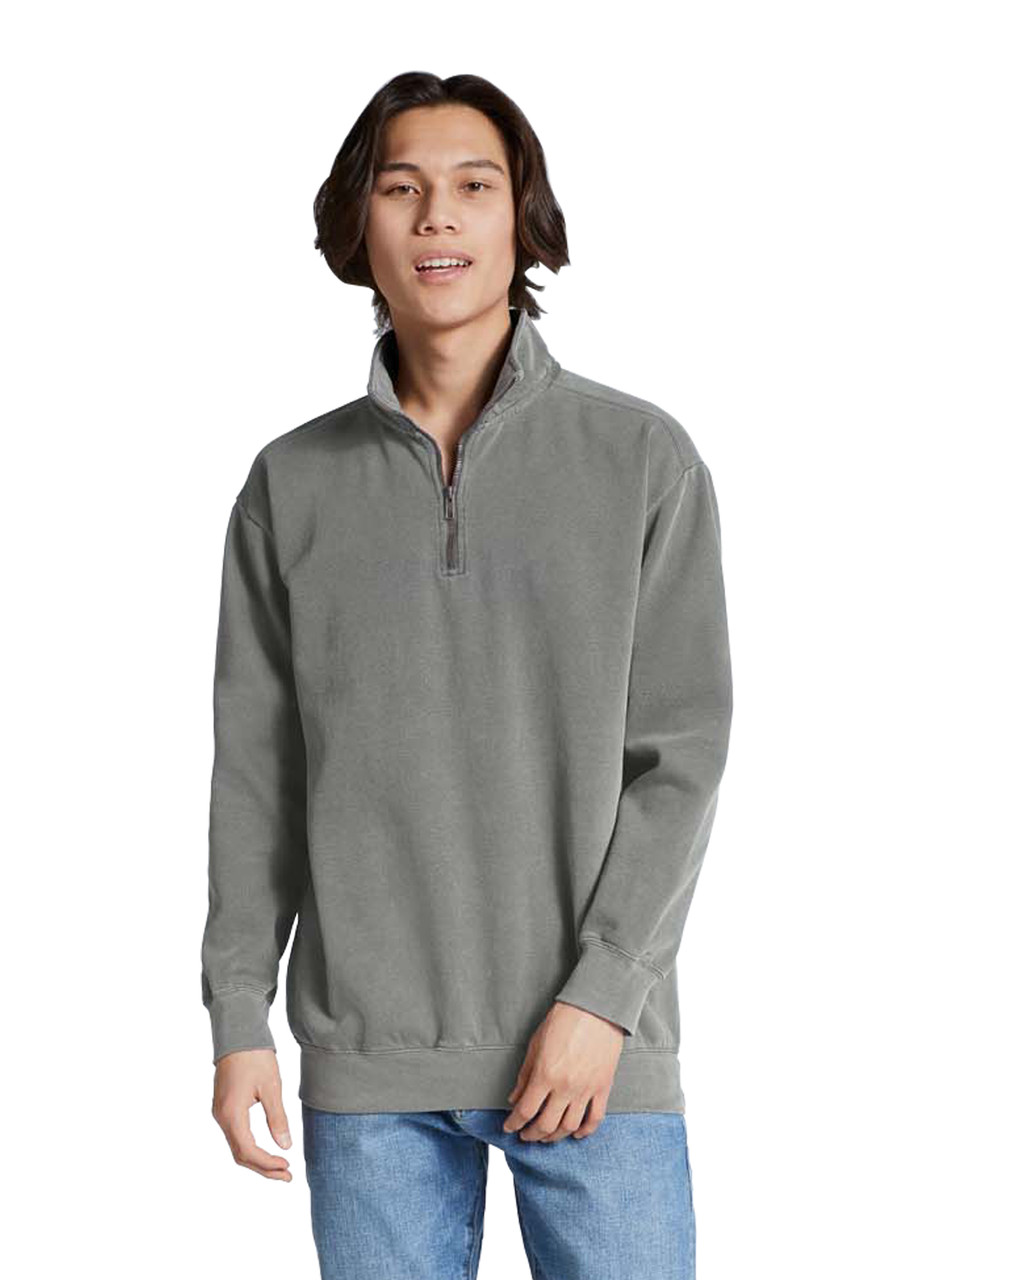 The Ultimate Comfort Ensemble: Rocking a Quarter-Zip Pullover